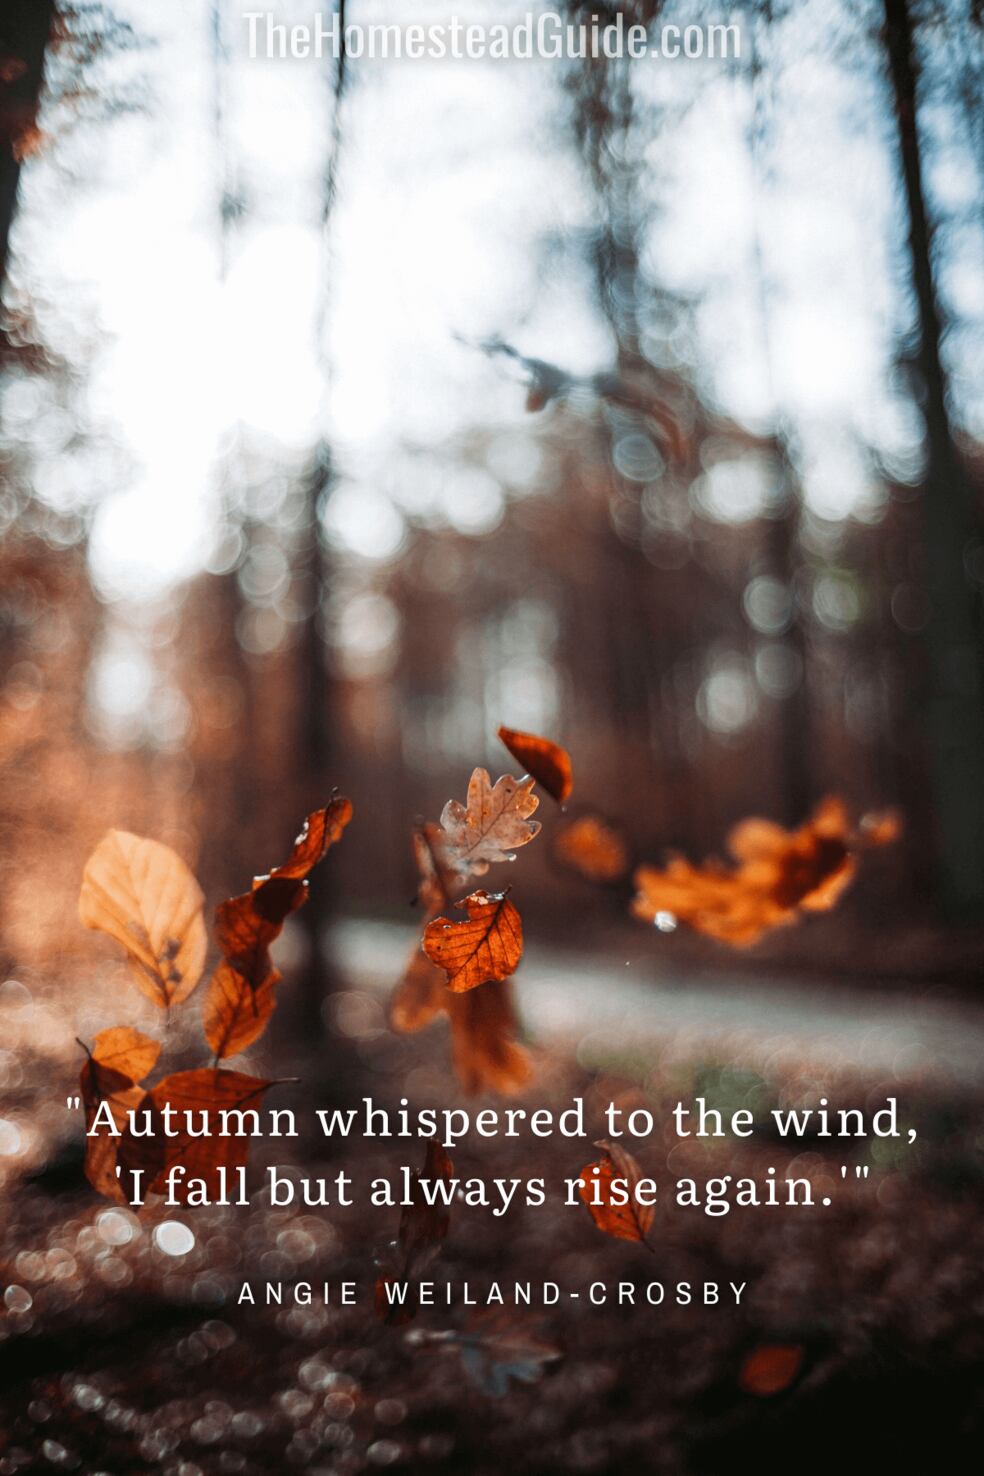 Autumn whispered to the wind, I fall but always rise again.